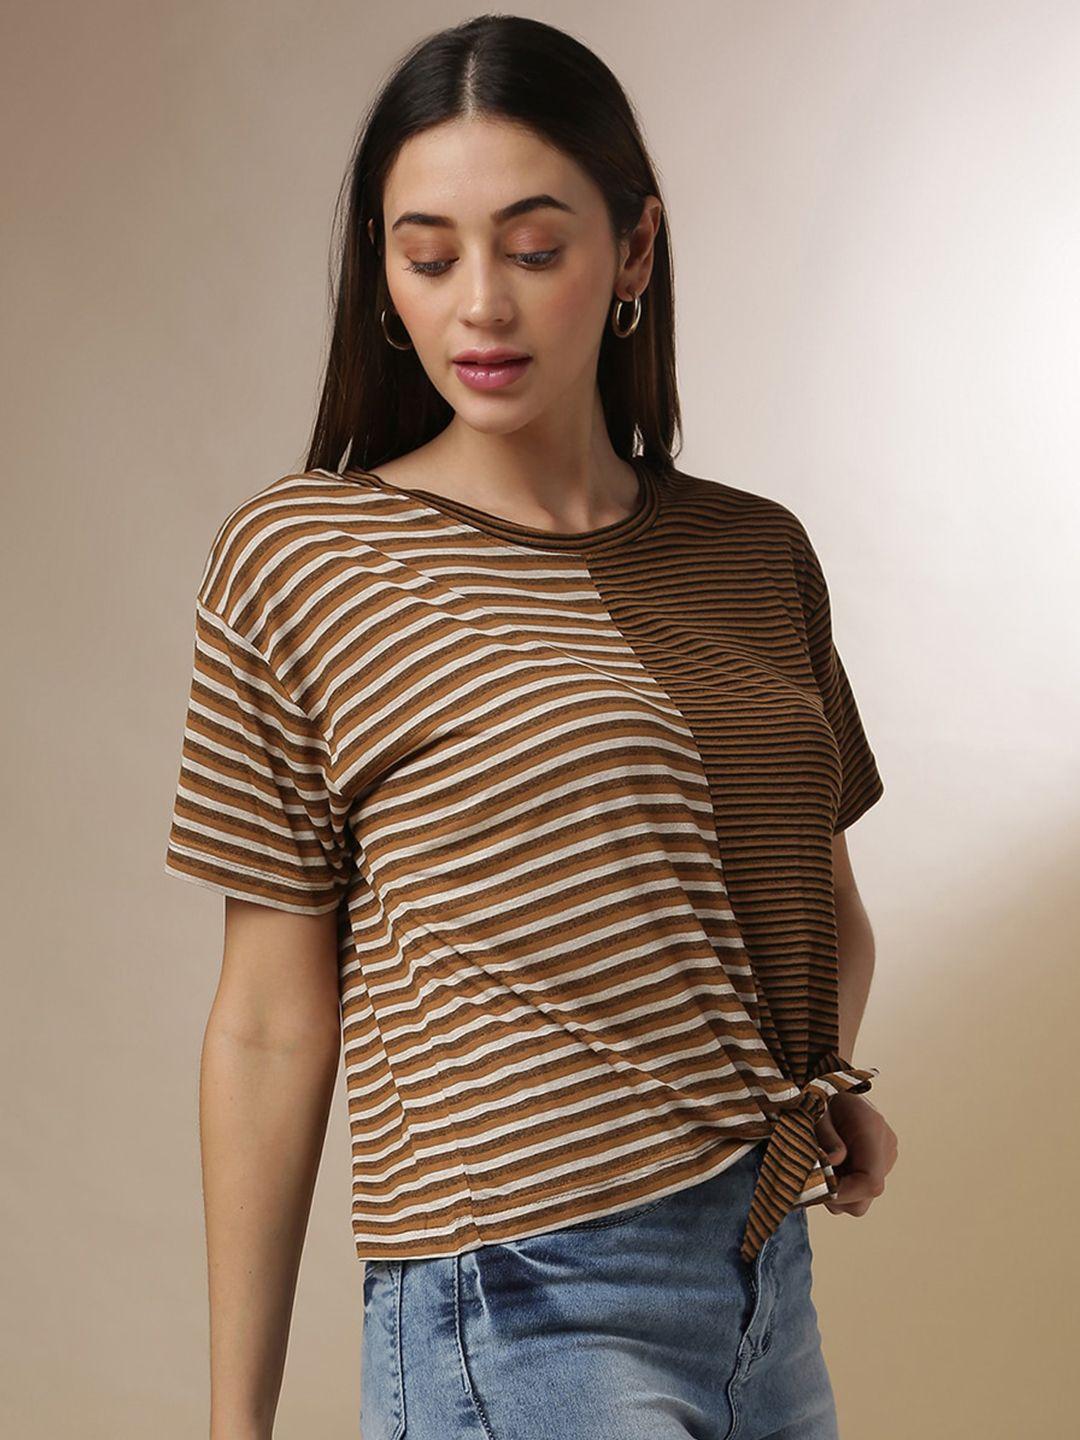 campus-sutra-brown-striped-extended-sleeves-regular-top